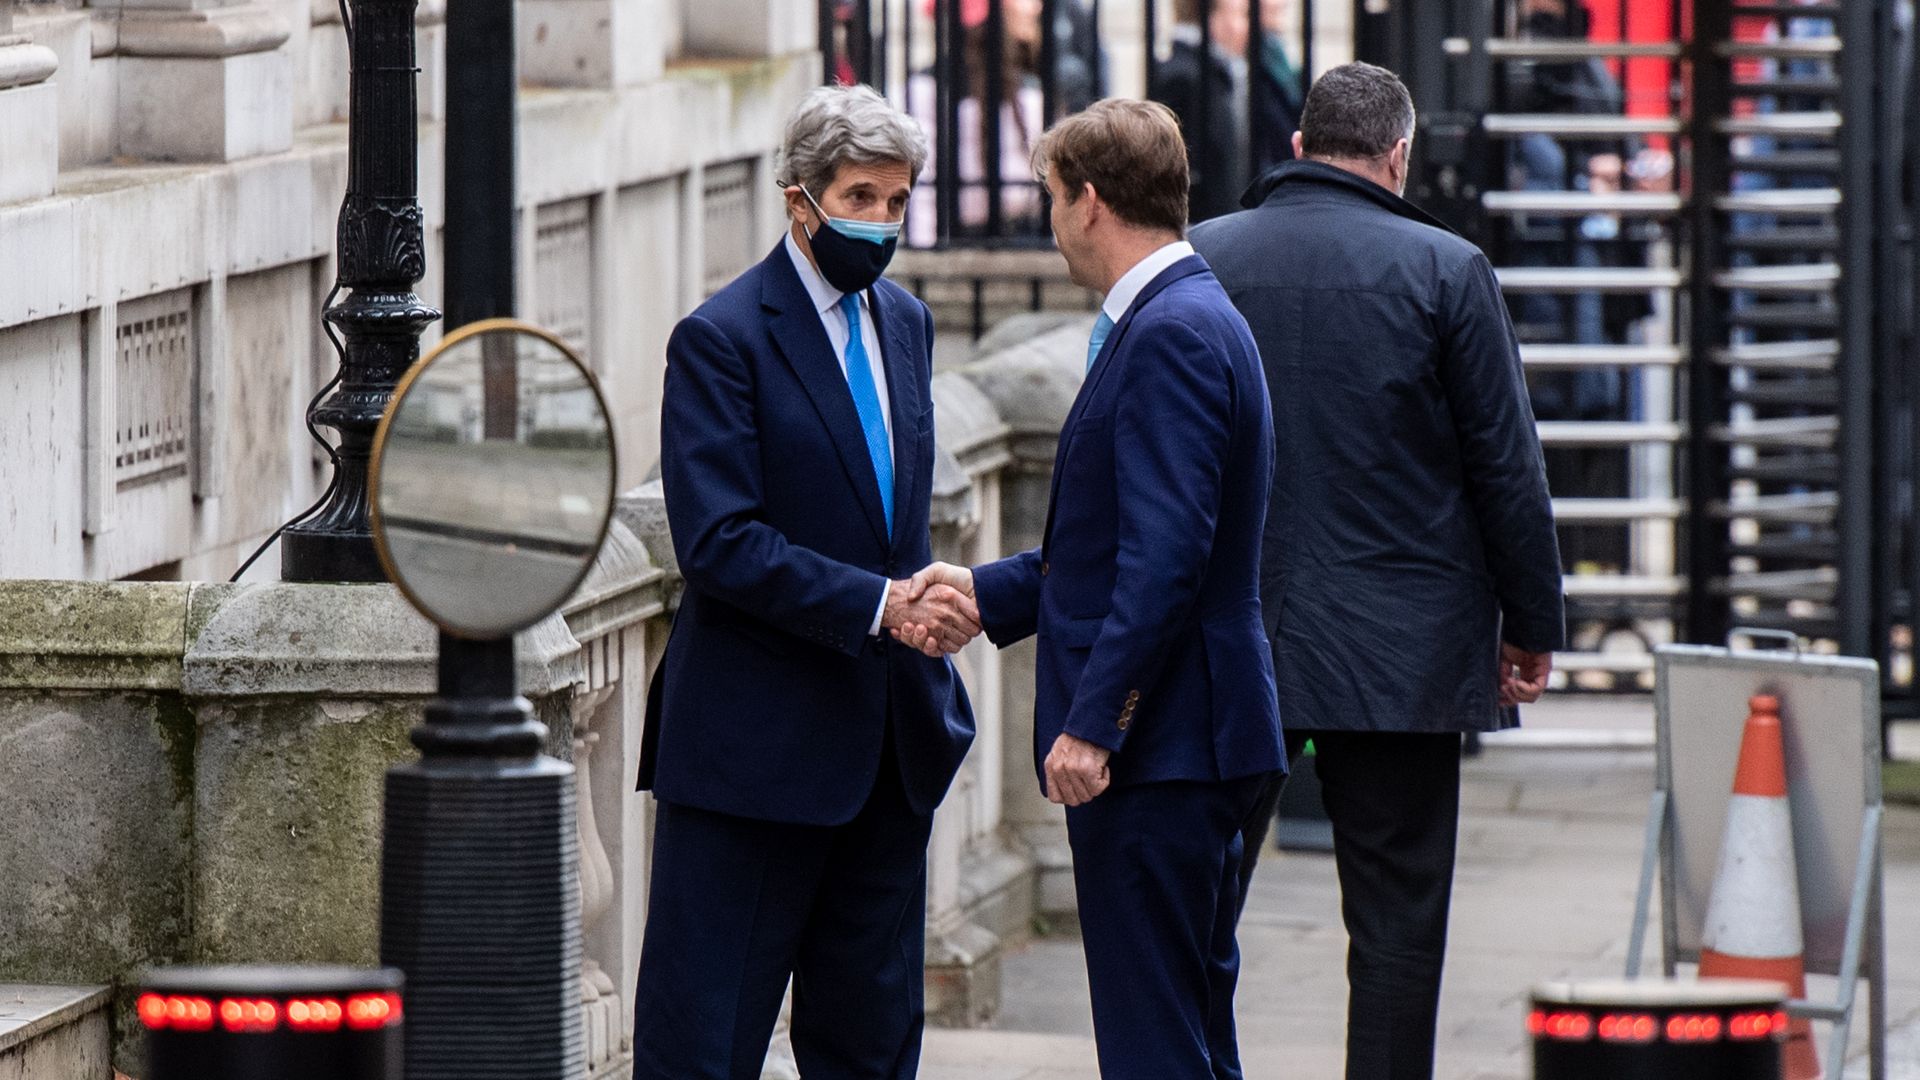 John Kerry arrives at 10 Downing Street in London for meetings on Dec. 8, 2021.